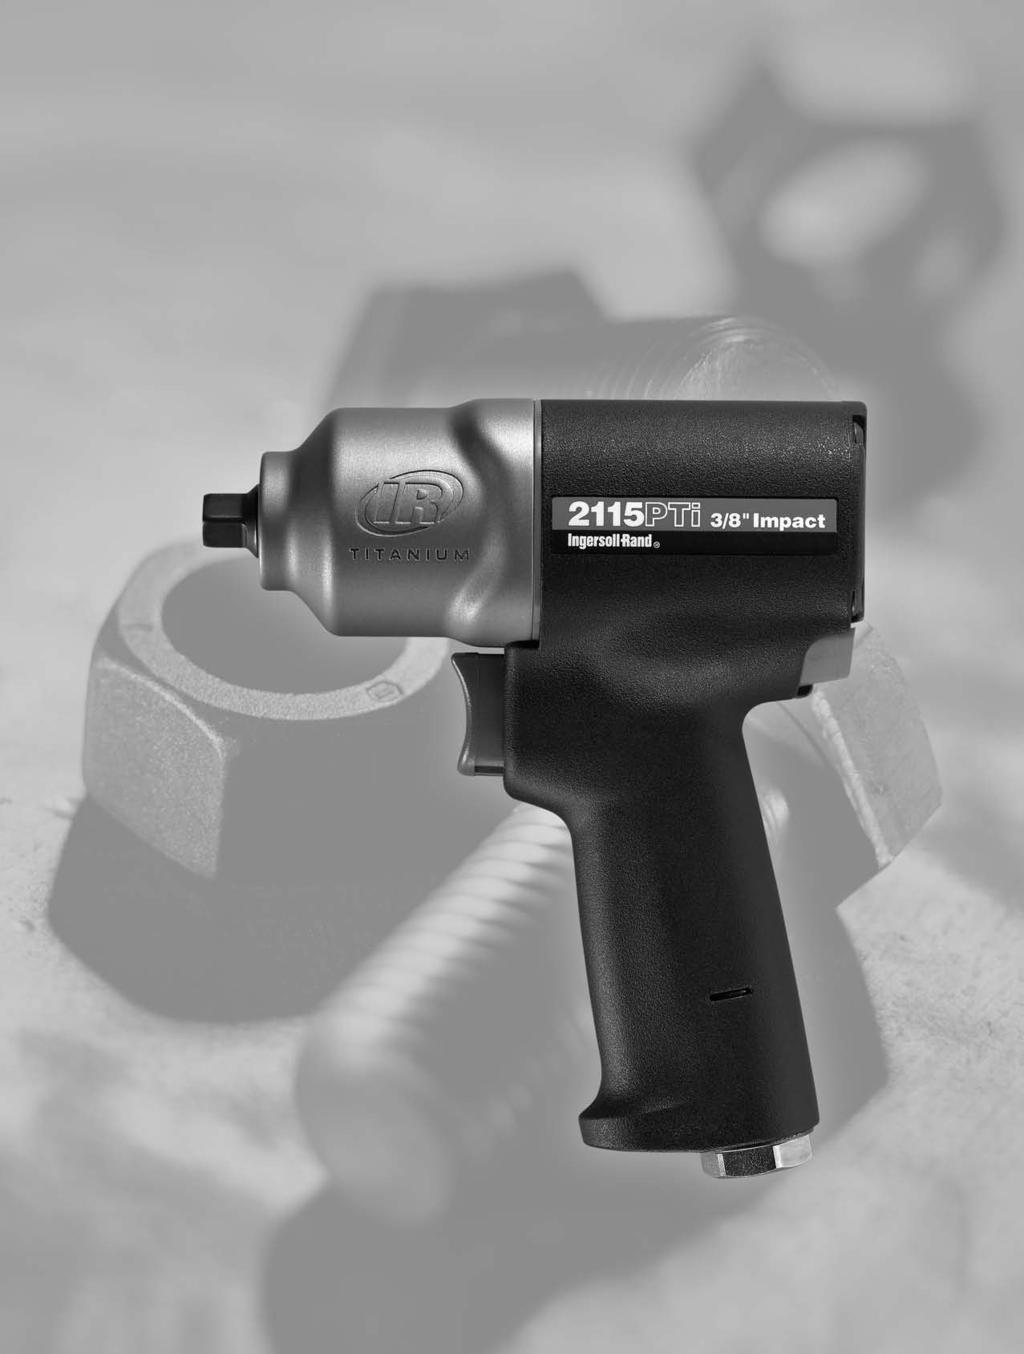 A New Standard of Performance 280 ft.-lbs. of Torque in a tool weighing just 2.4 lbs. The IR2115PTi 3/8 Drive Model Ultimate productivity means using the right tool for the job.